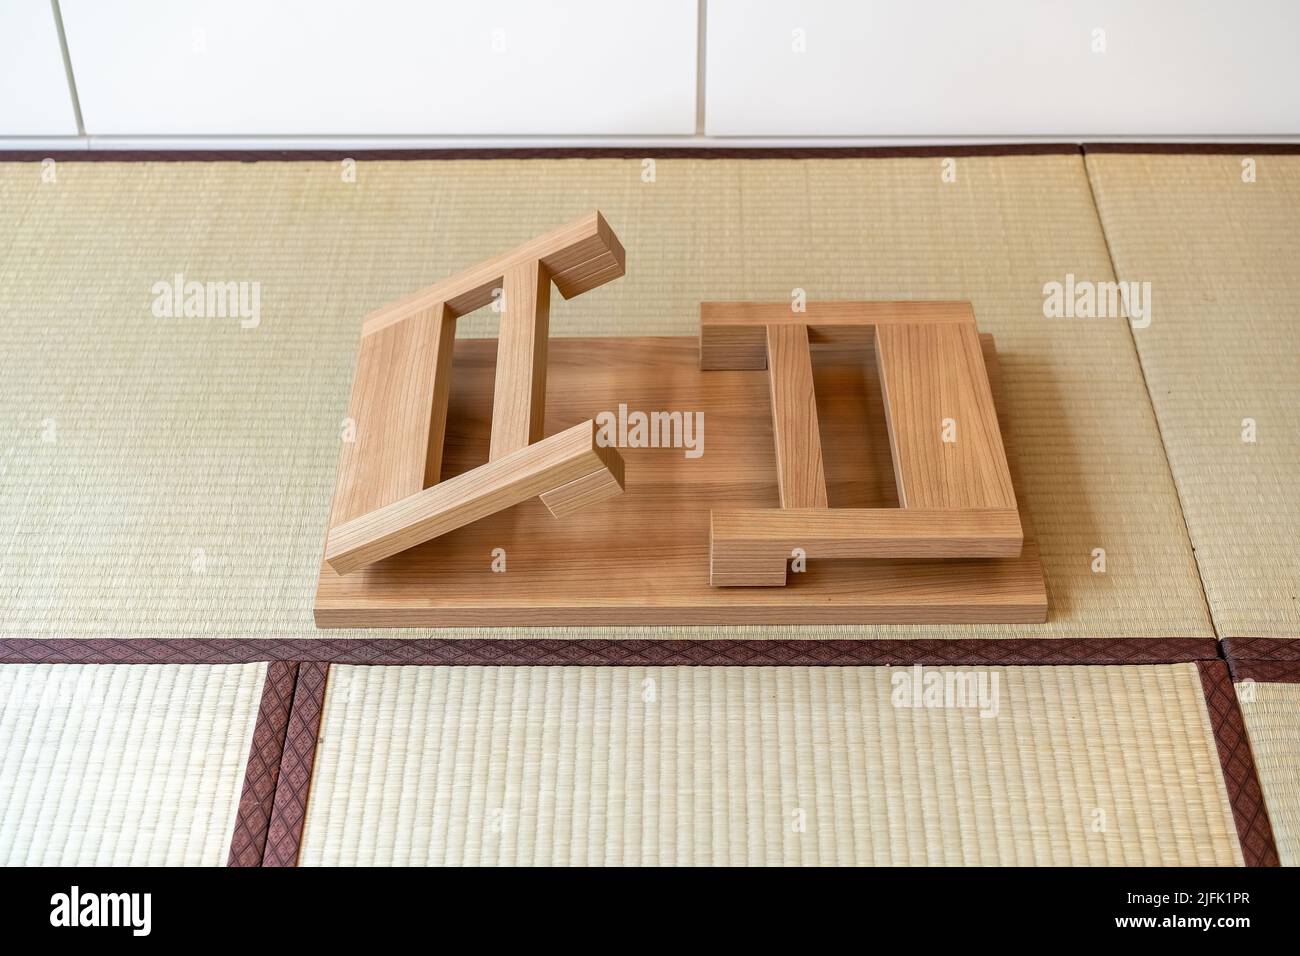 A Japanese folding table made of wood is set at the center of the picture,  suitable for eating or reading, on tatami mats Stock Photo - Alamy